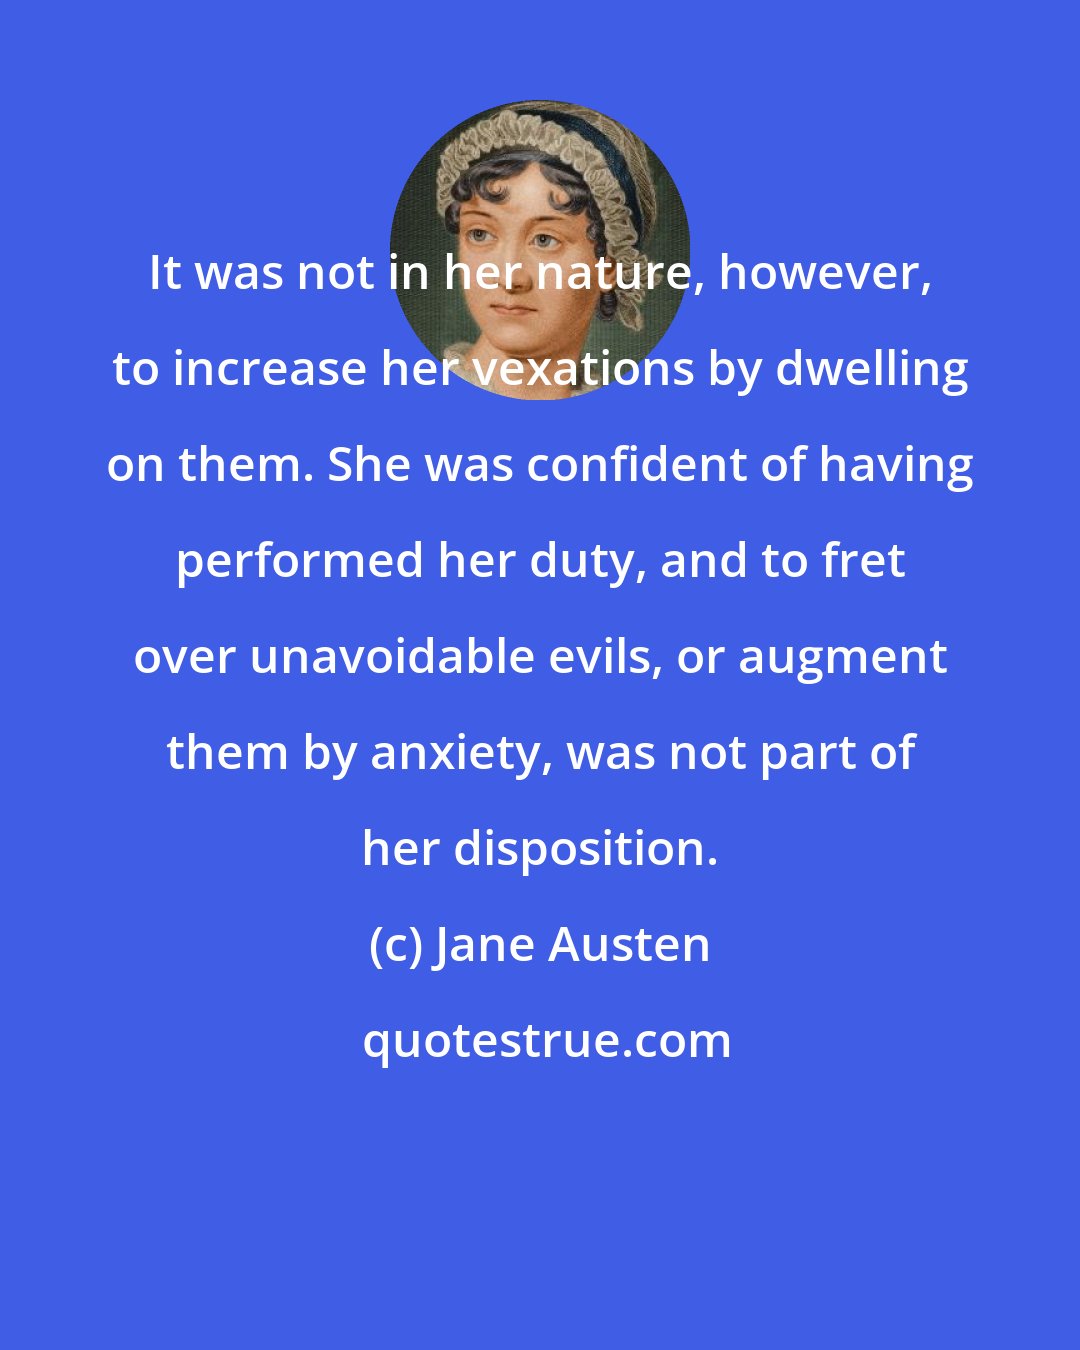 Jane Austen: It was not in her nature, however, to increase her vexations by dwelling on them. She was confident of having performed her duty, and to fret over unavoidable evils, or augment them by anxiety, was not part of her disposition.